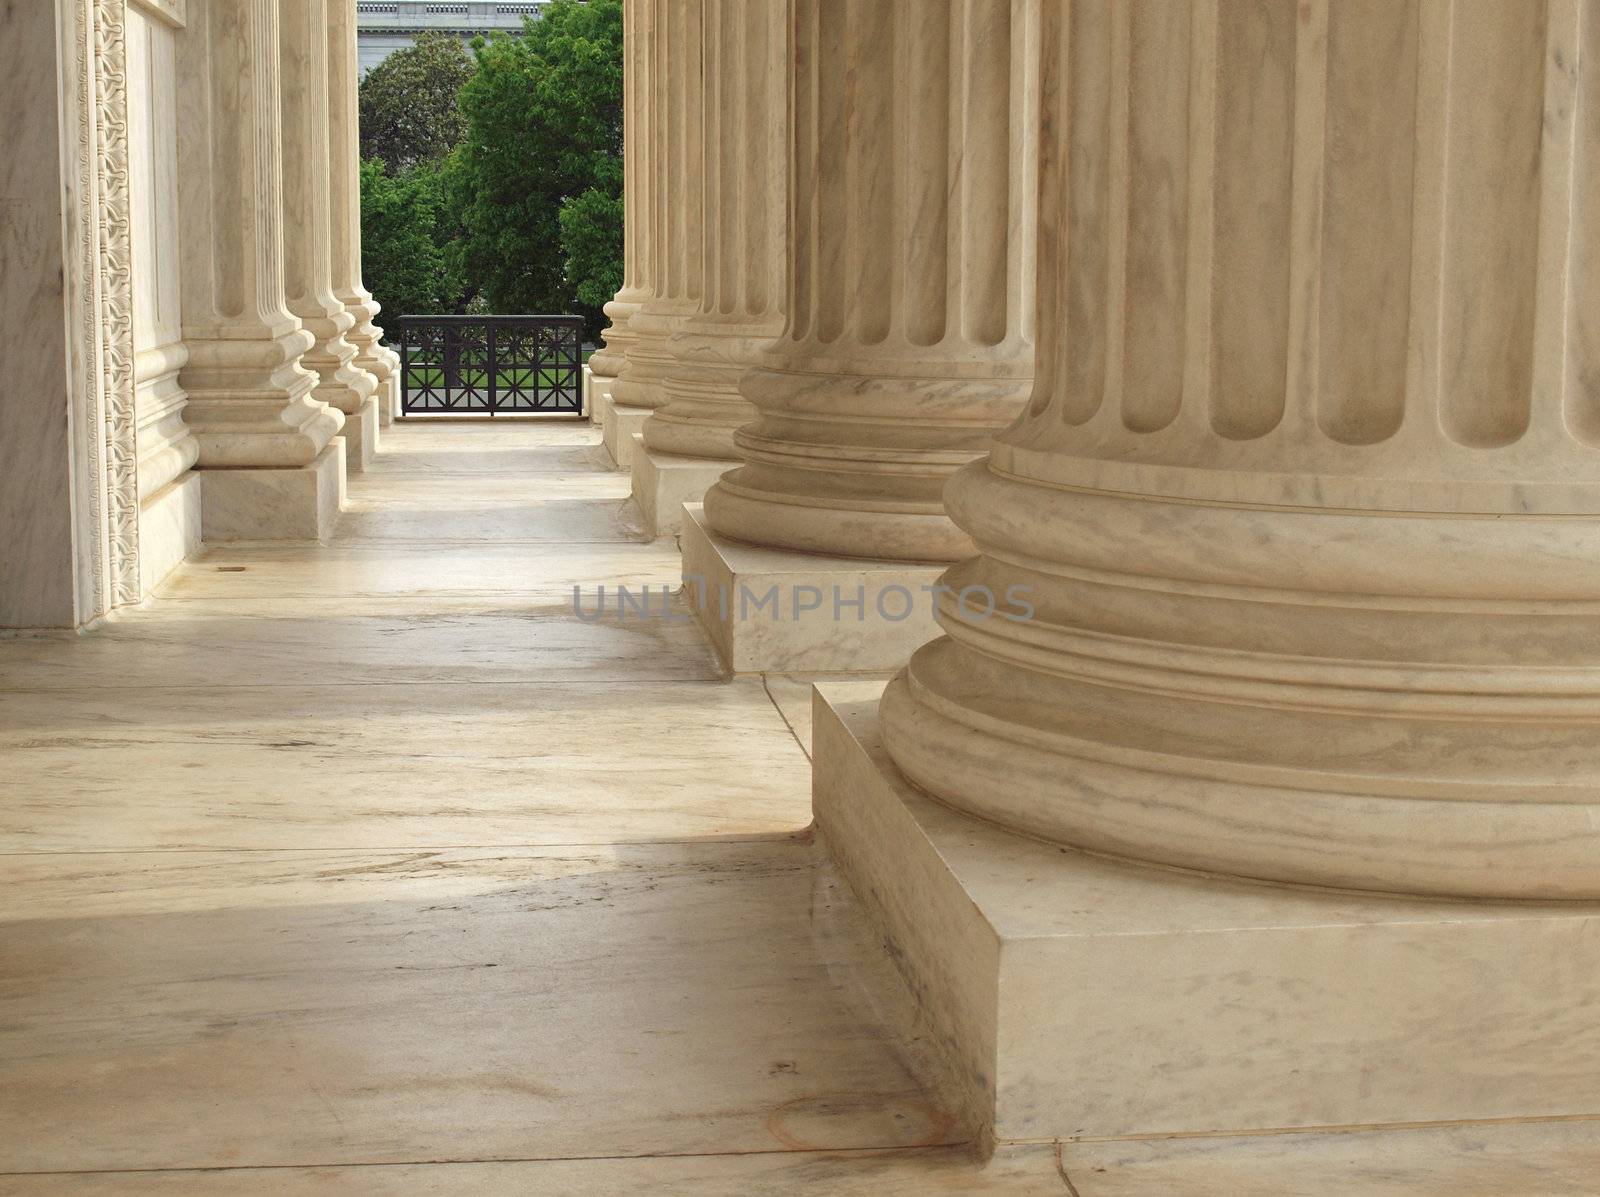 Columns at the United States Supreme Court in Washington DC